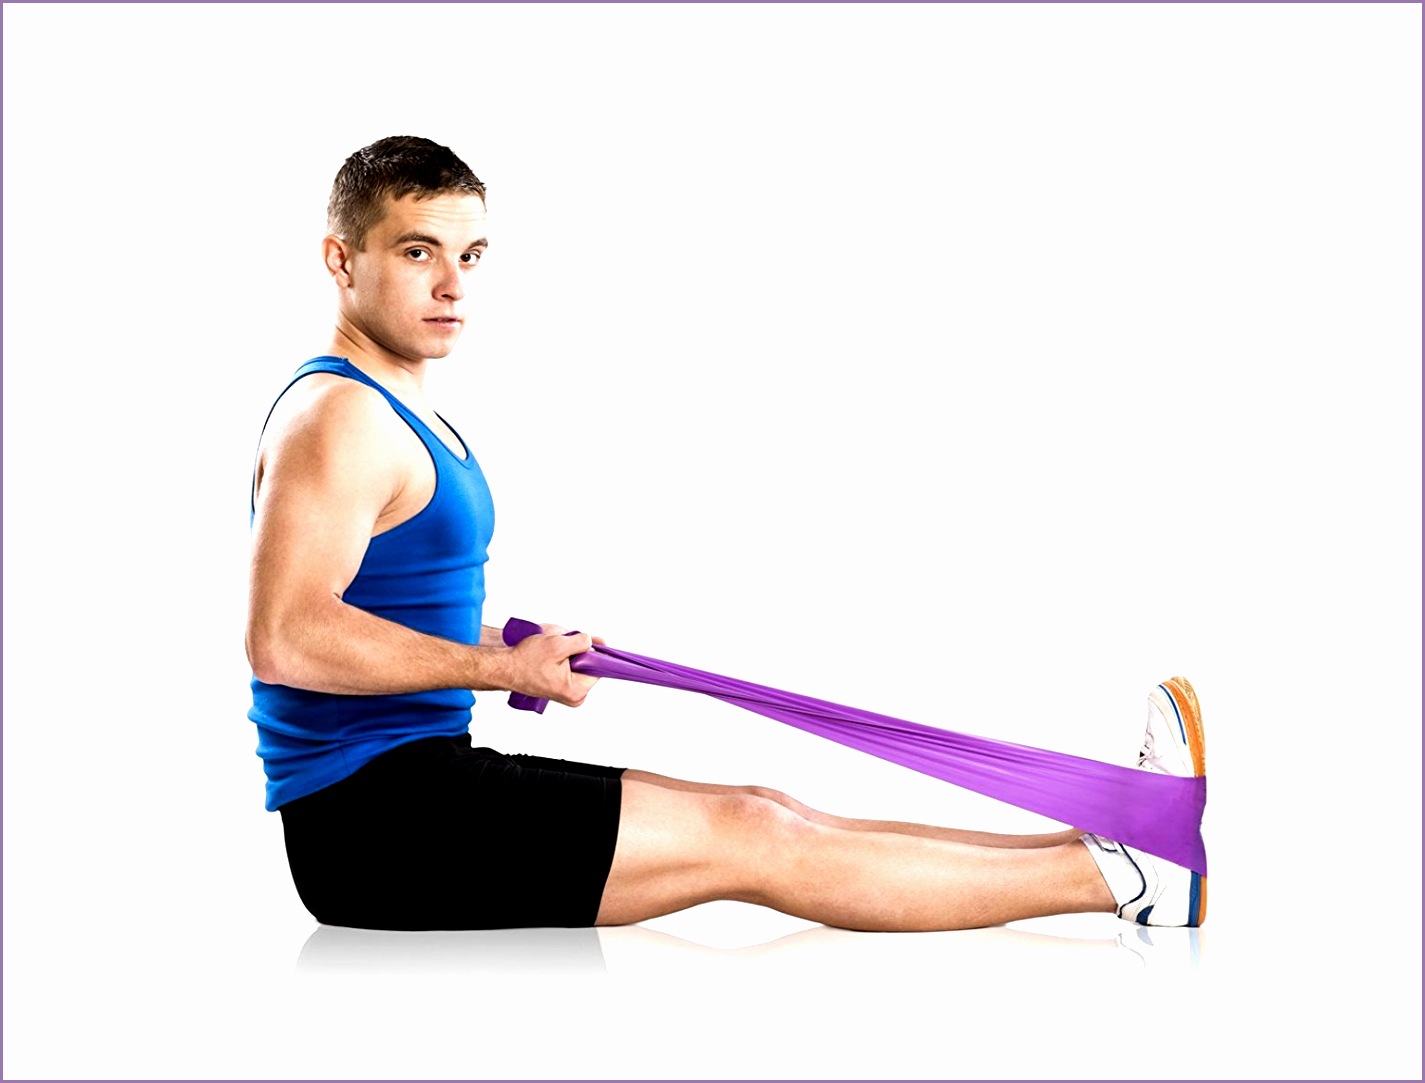 super exercise band 7 ft long resistance bands latex free home gym fitness equipment for physical therapy pilates stretch yoga strength training workout choose light medium or heavy tension